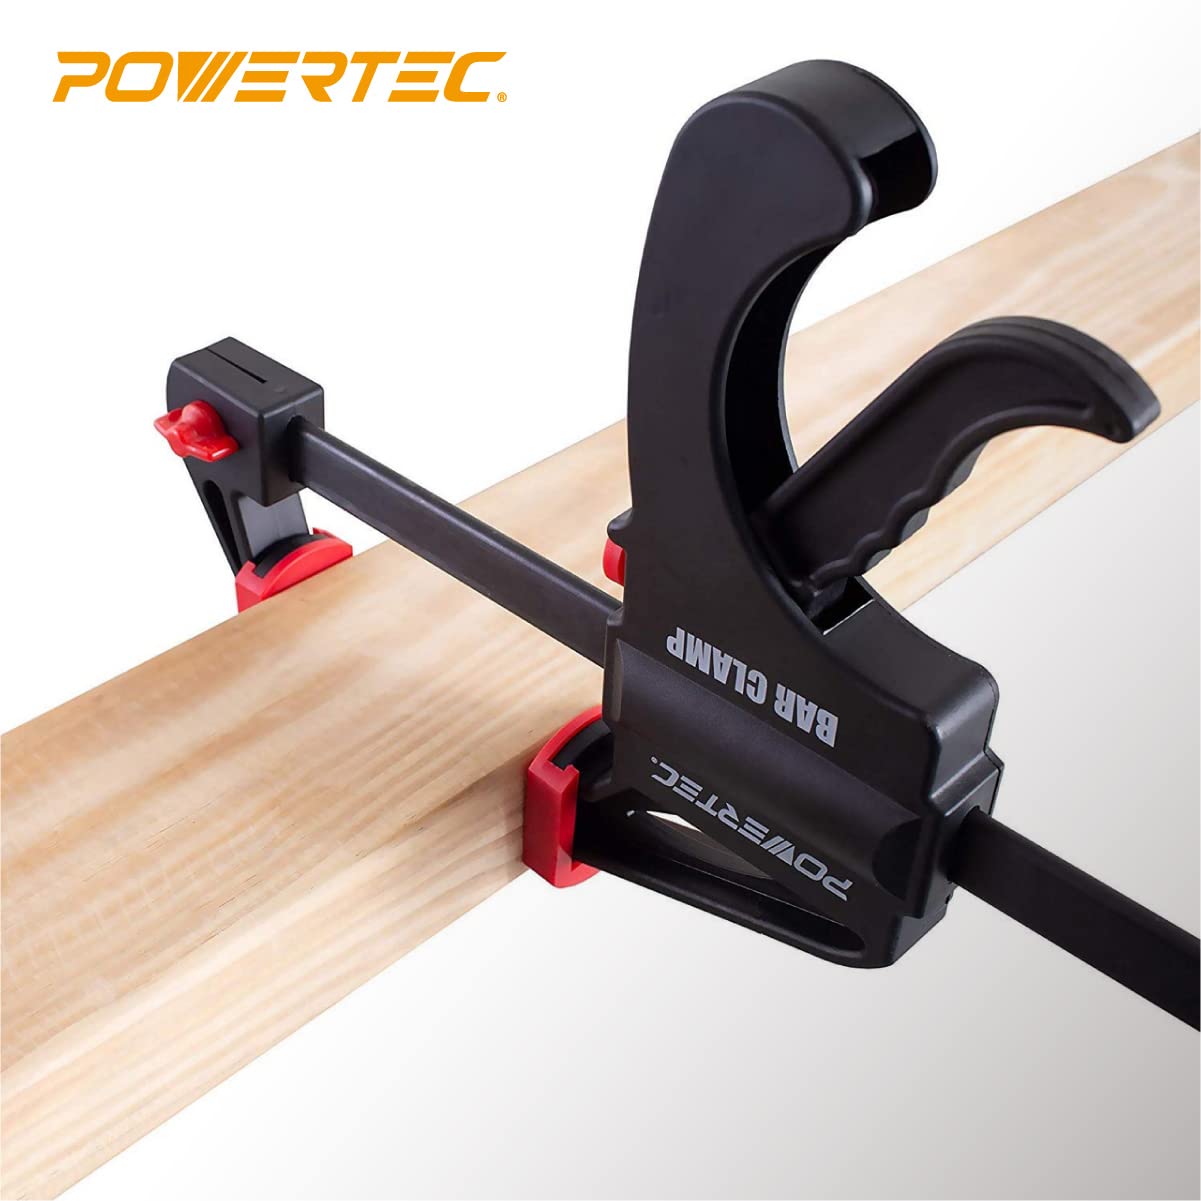 POWERTEC 71789 12", 24" and 36" Bar Clamps with Spreader, Trigger Clamps for Woodworking, One-Handed Carpenter Quick Clamp Sets for Gluing, Wood Clamps for Woodworking Tools, 6 pack